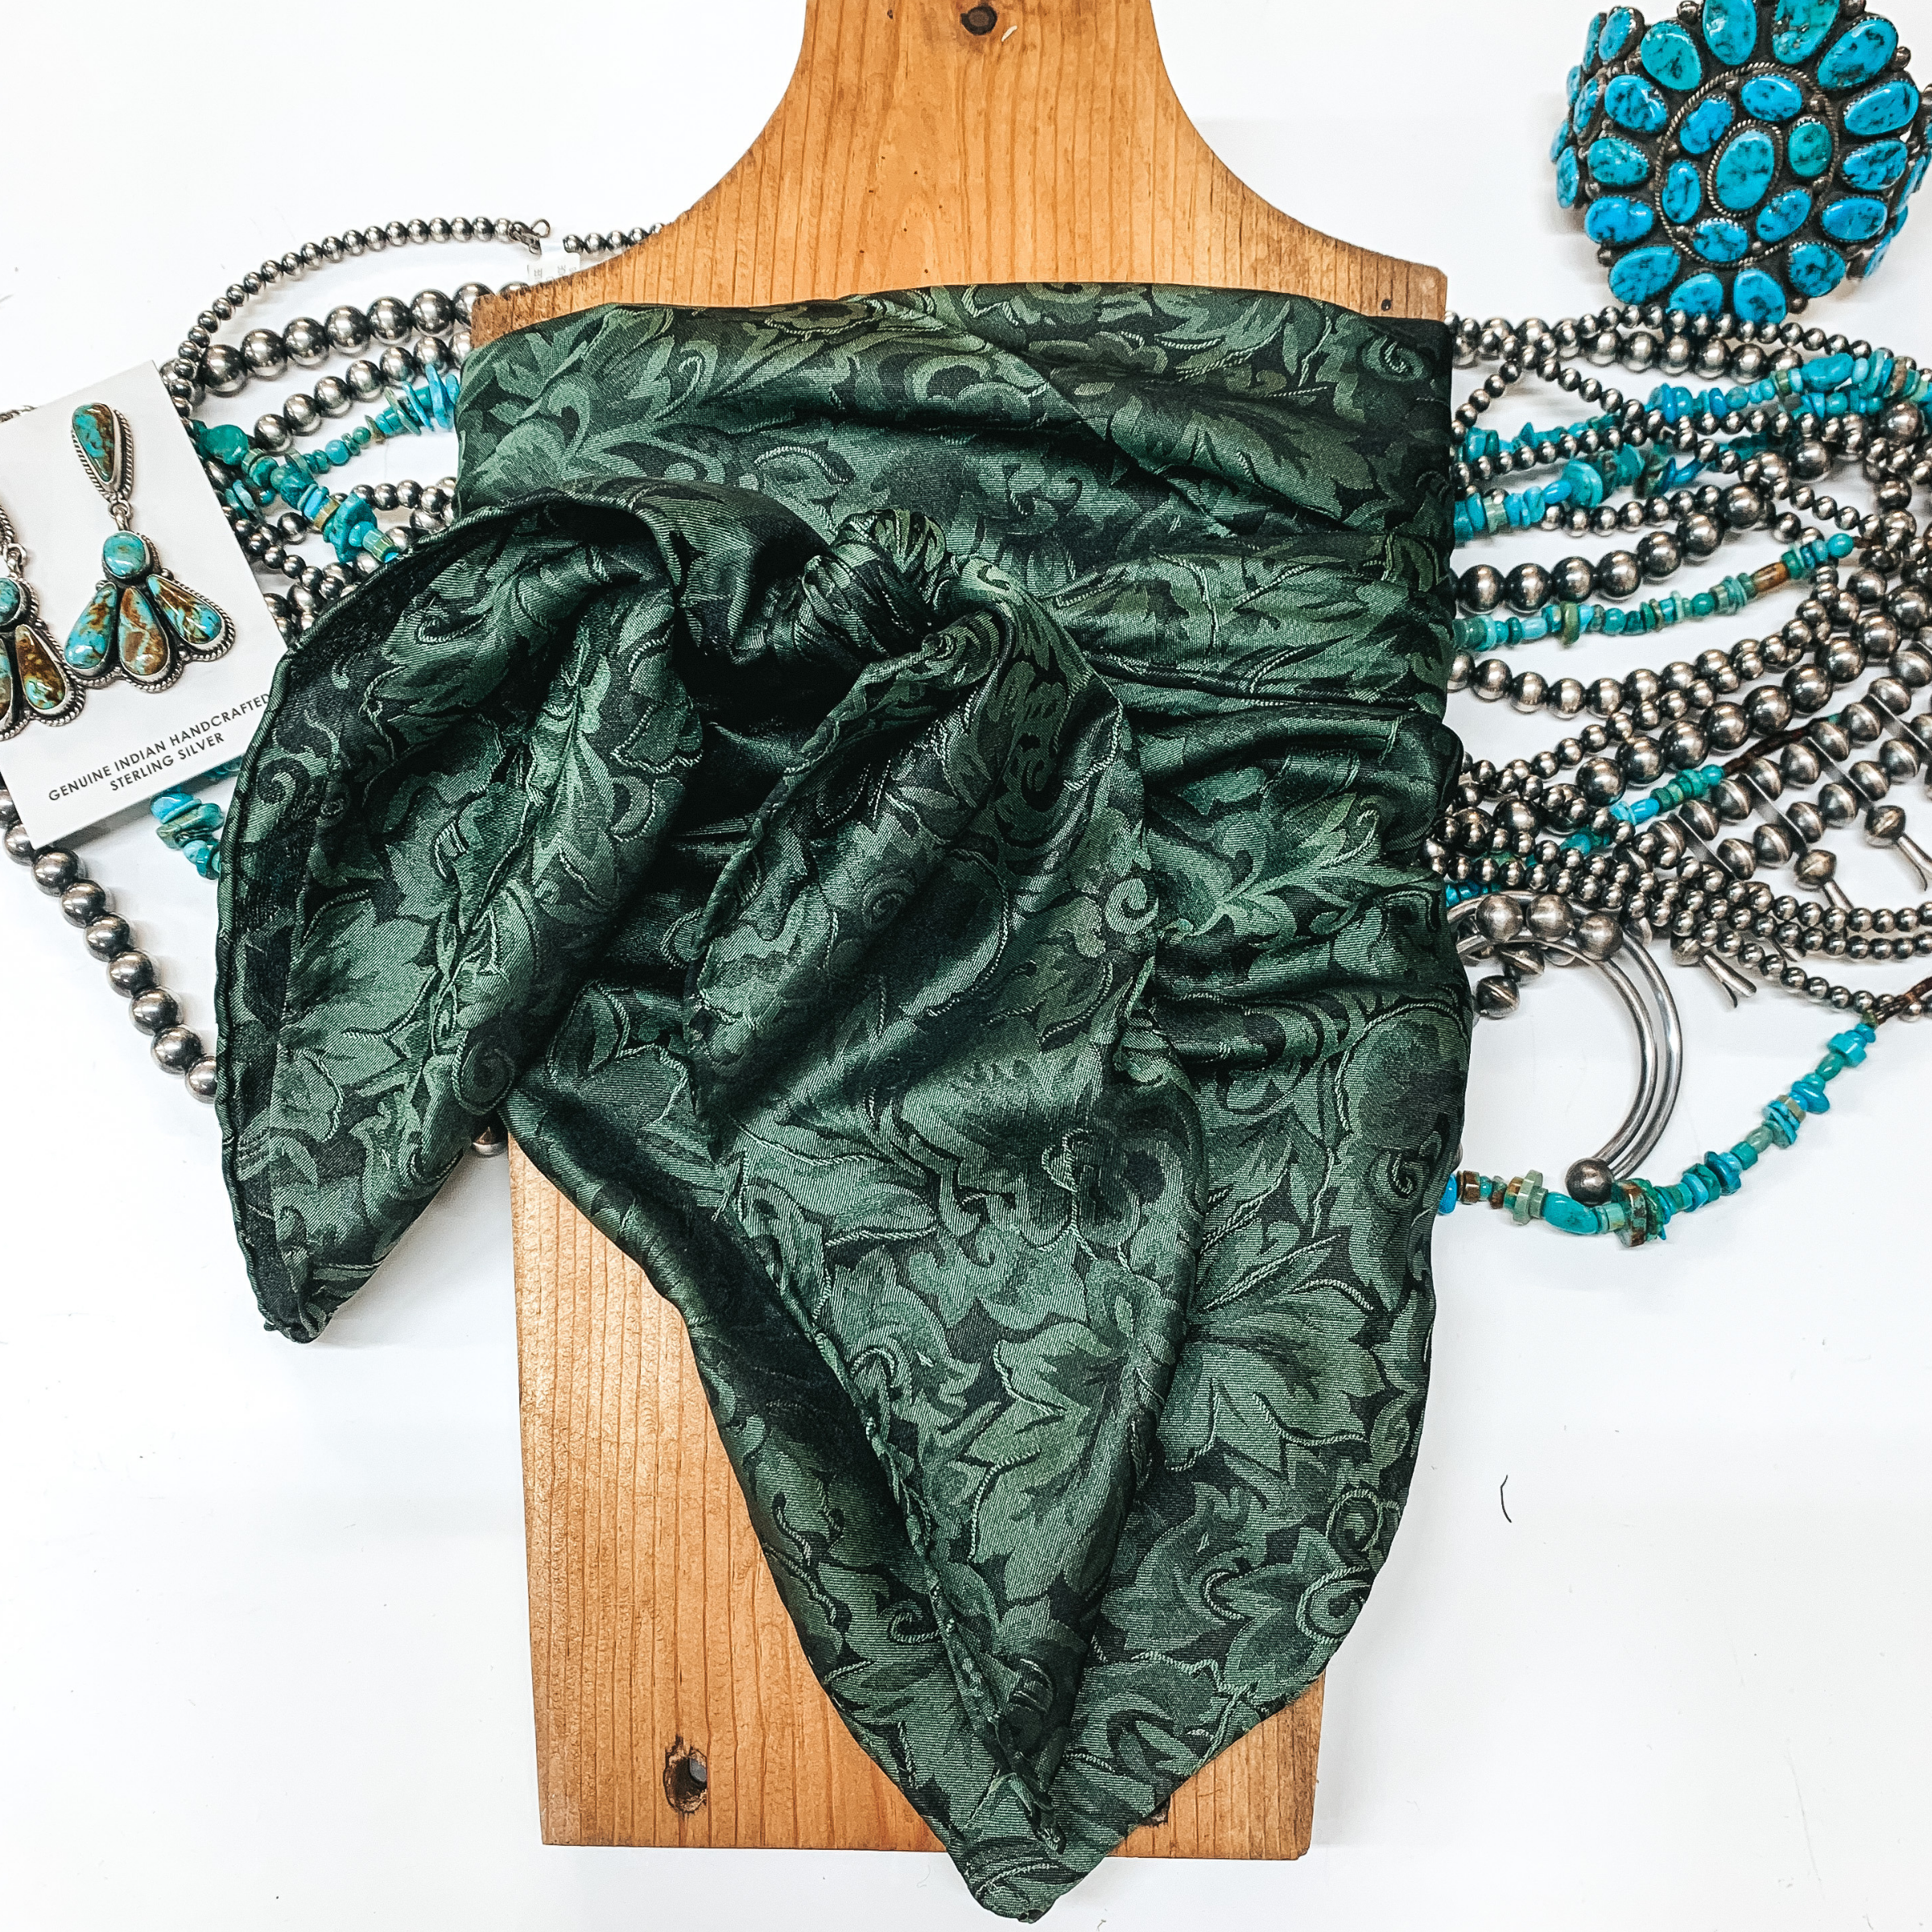 Baroque Wild Rag in Fern Green - Giddy Up Glamour Boutique